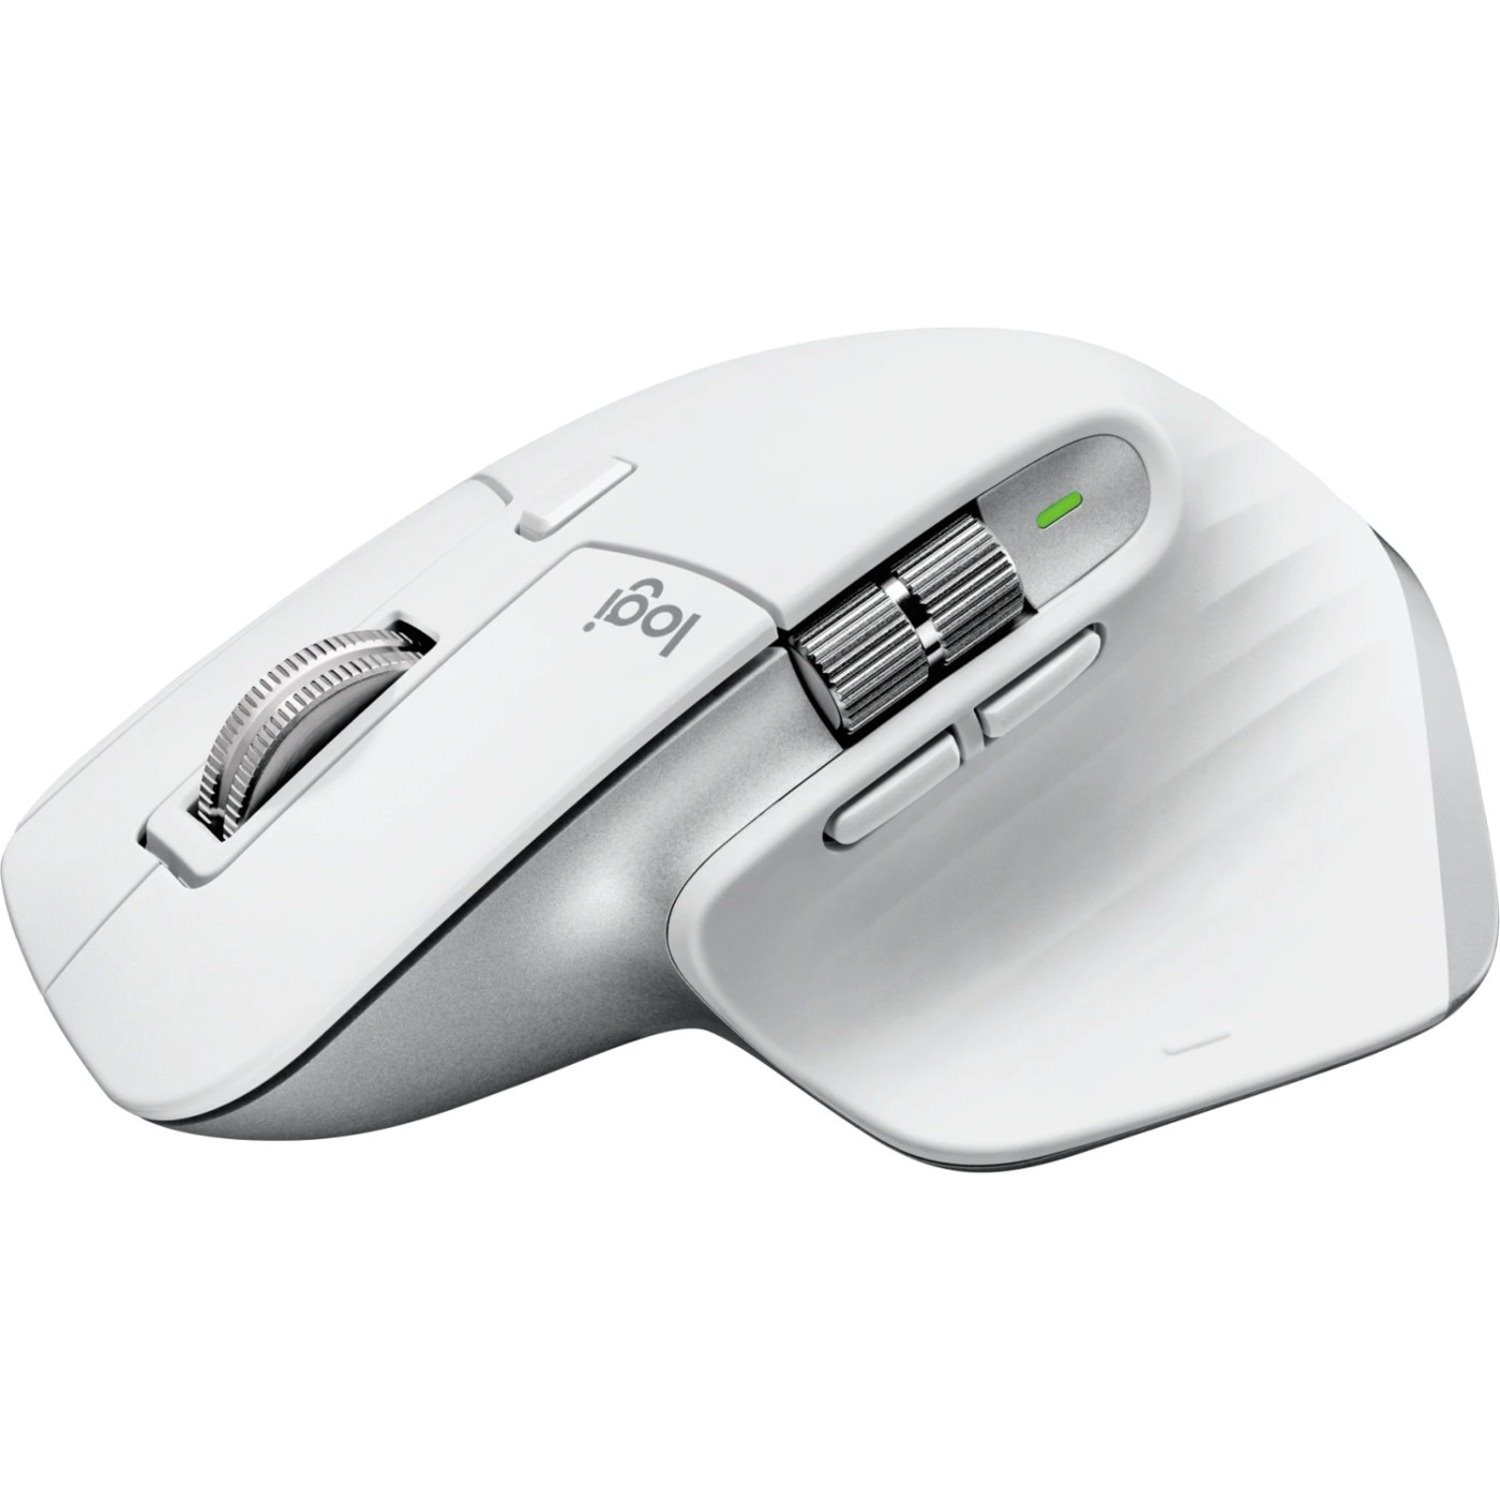 Logitech MX MASTER 3S Mouse - Bluetooth/Radio Frequency - USB Type C - Optical/Darkfield - 7 Button(s) - Pale Gray